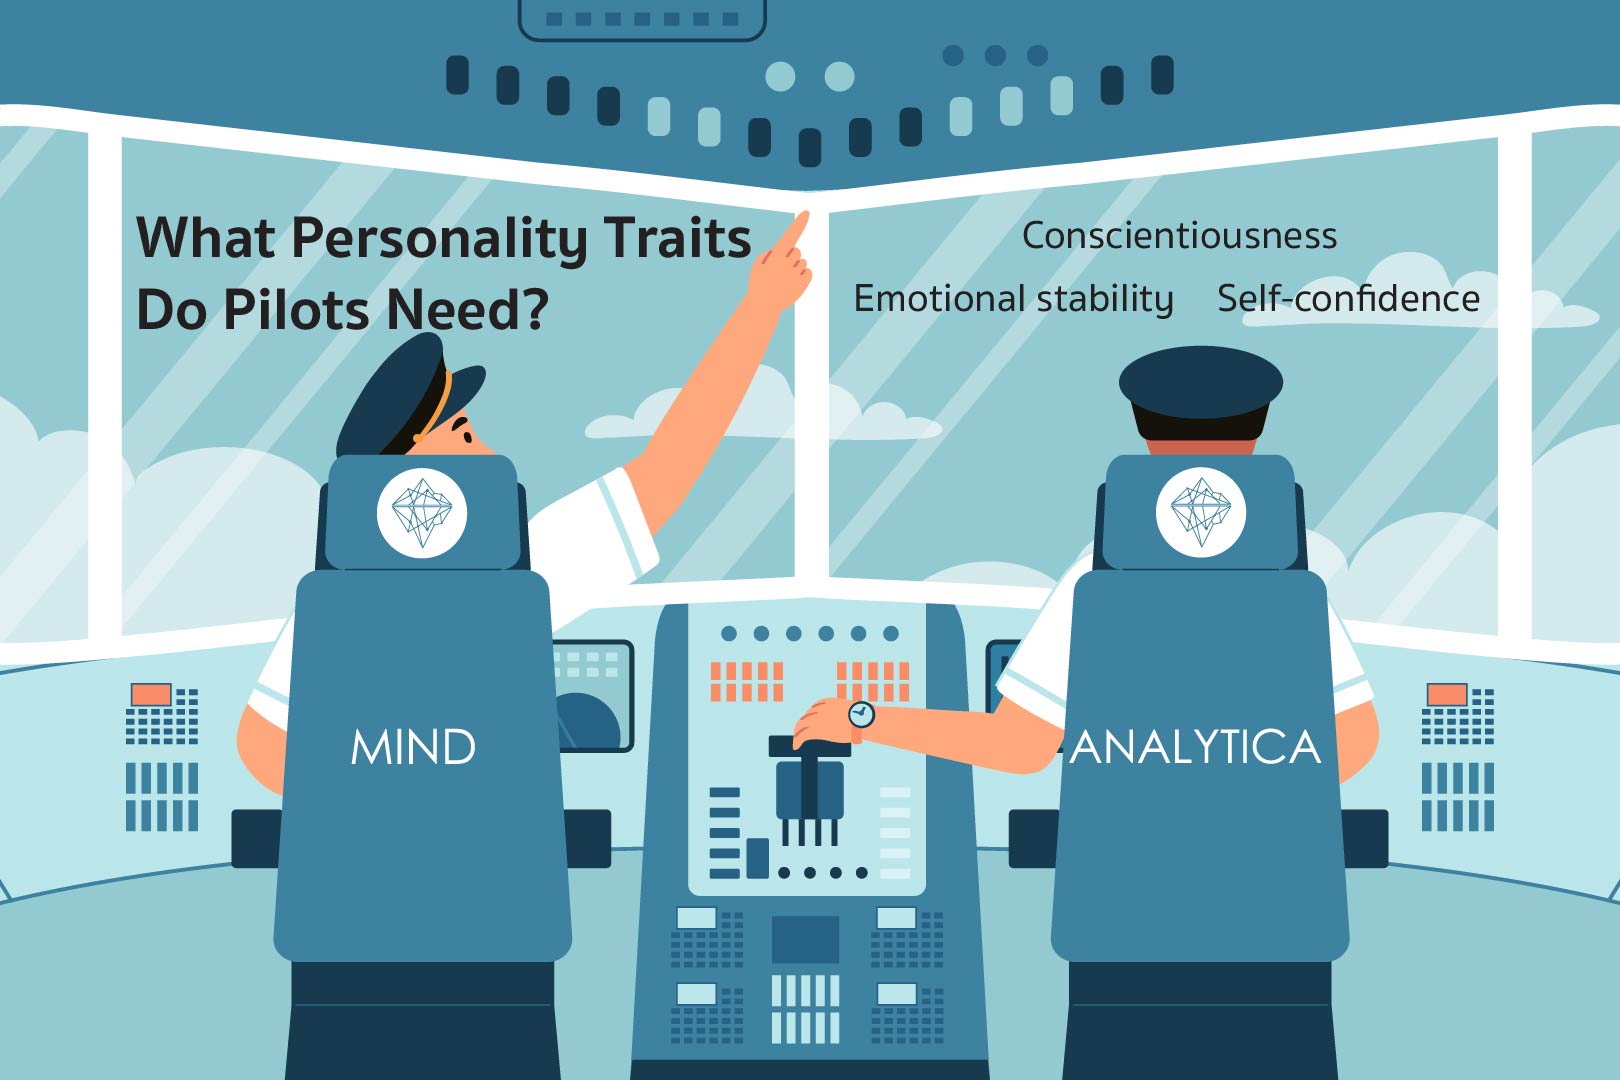 What Personality Traits Do Pilots Need?